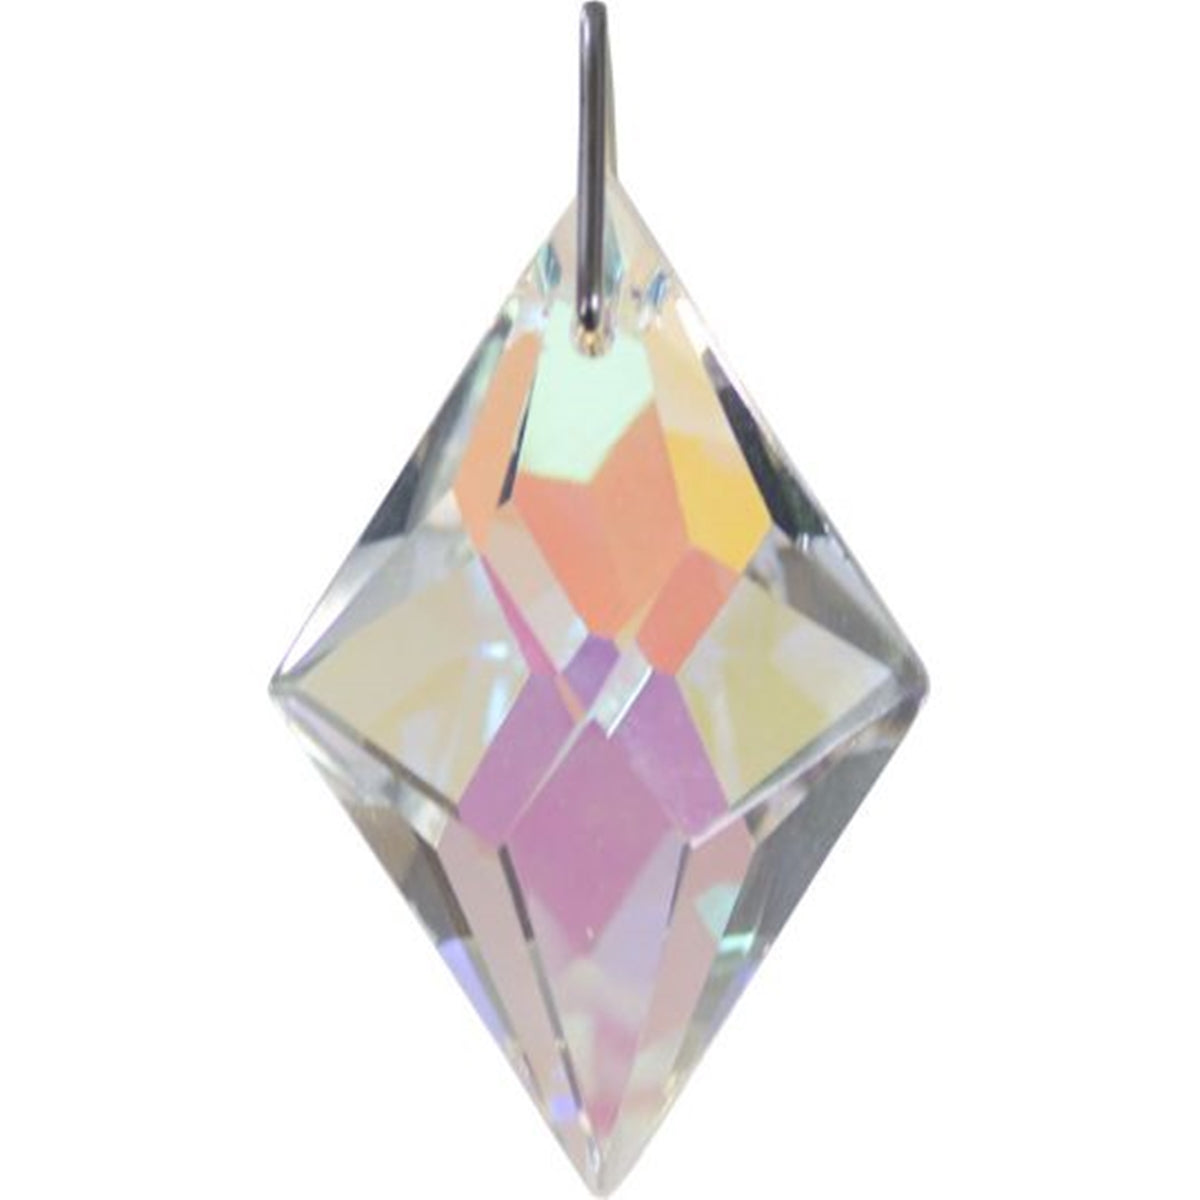 Faceted Diamond Crystal Prism - 38mm